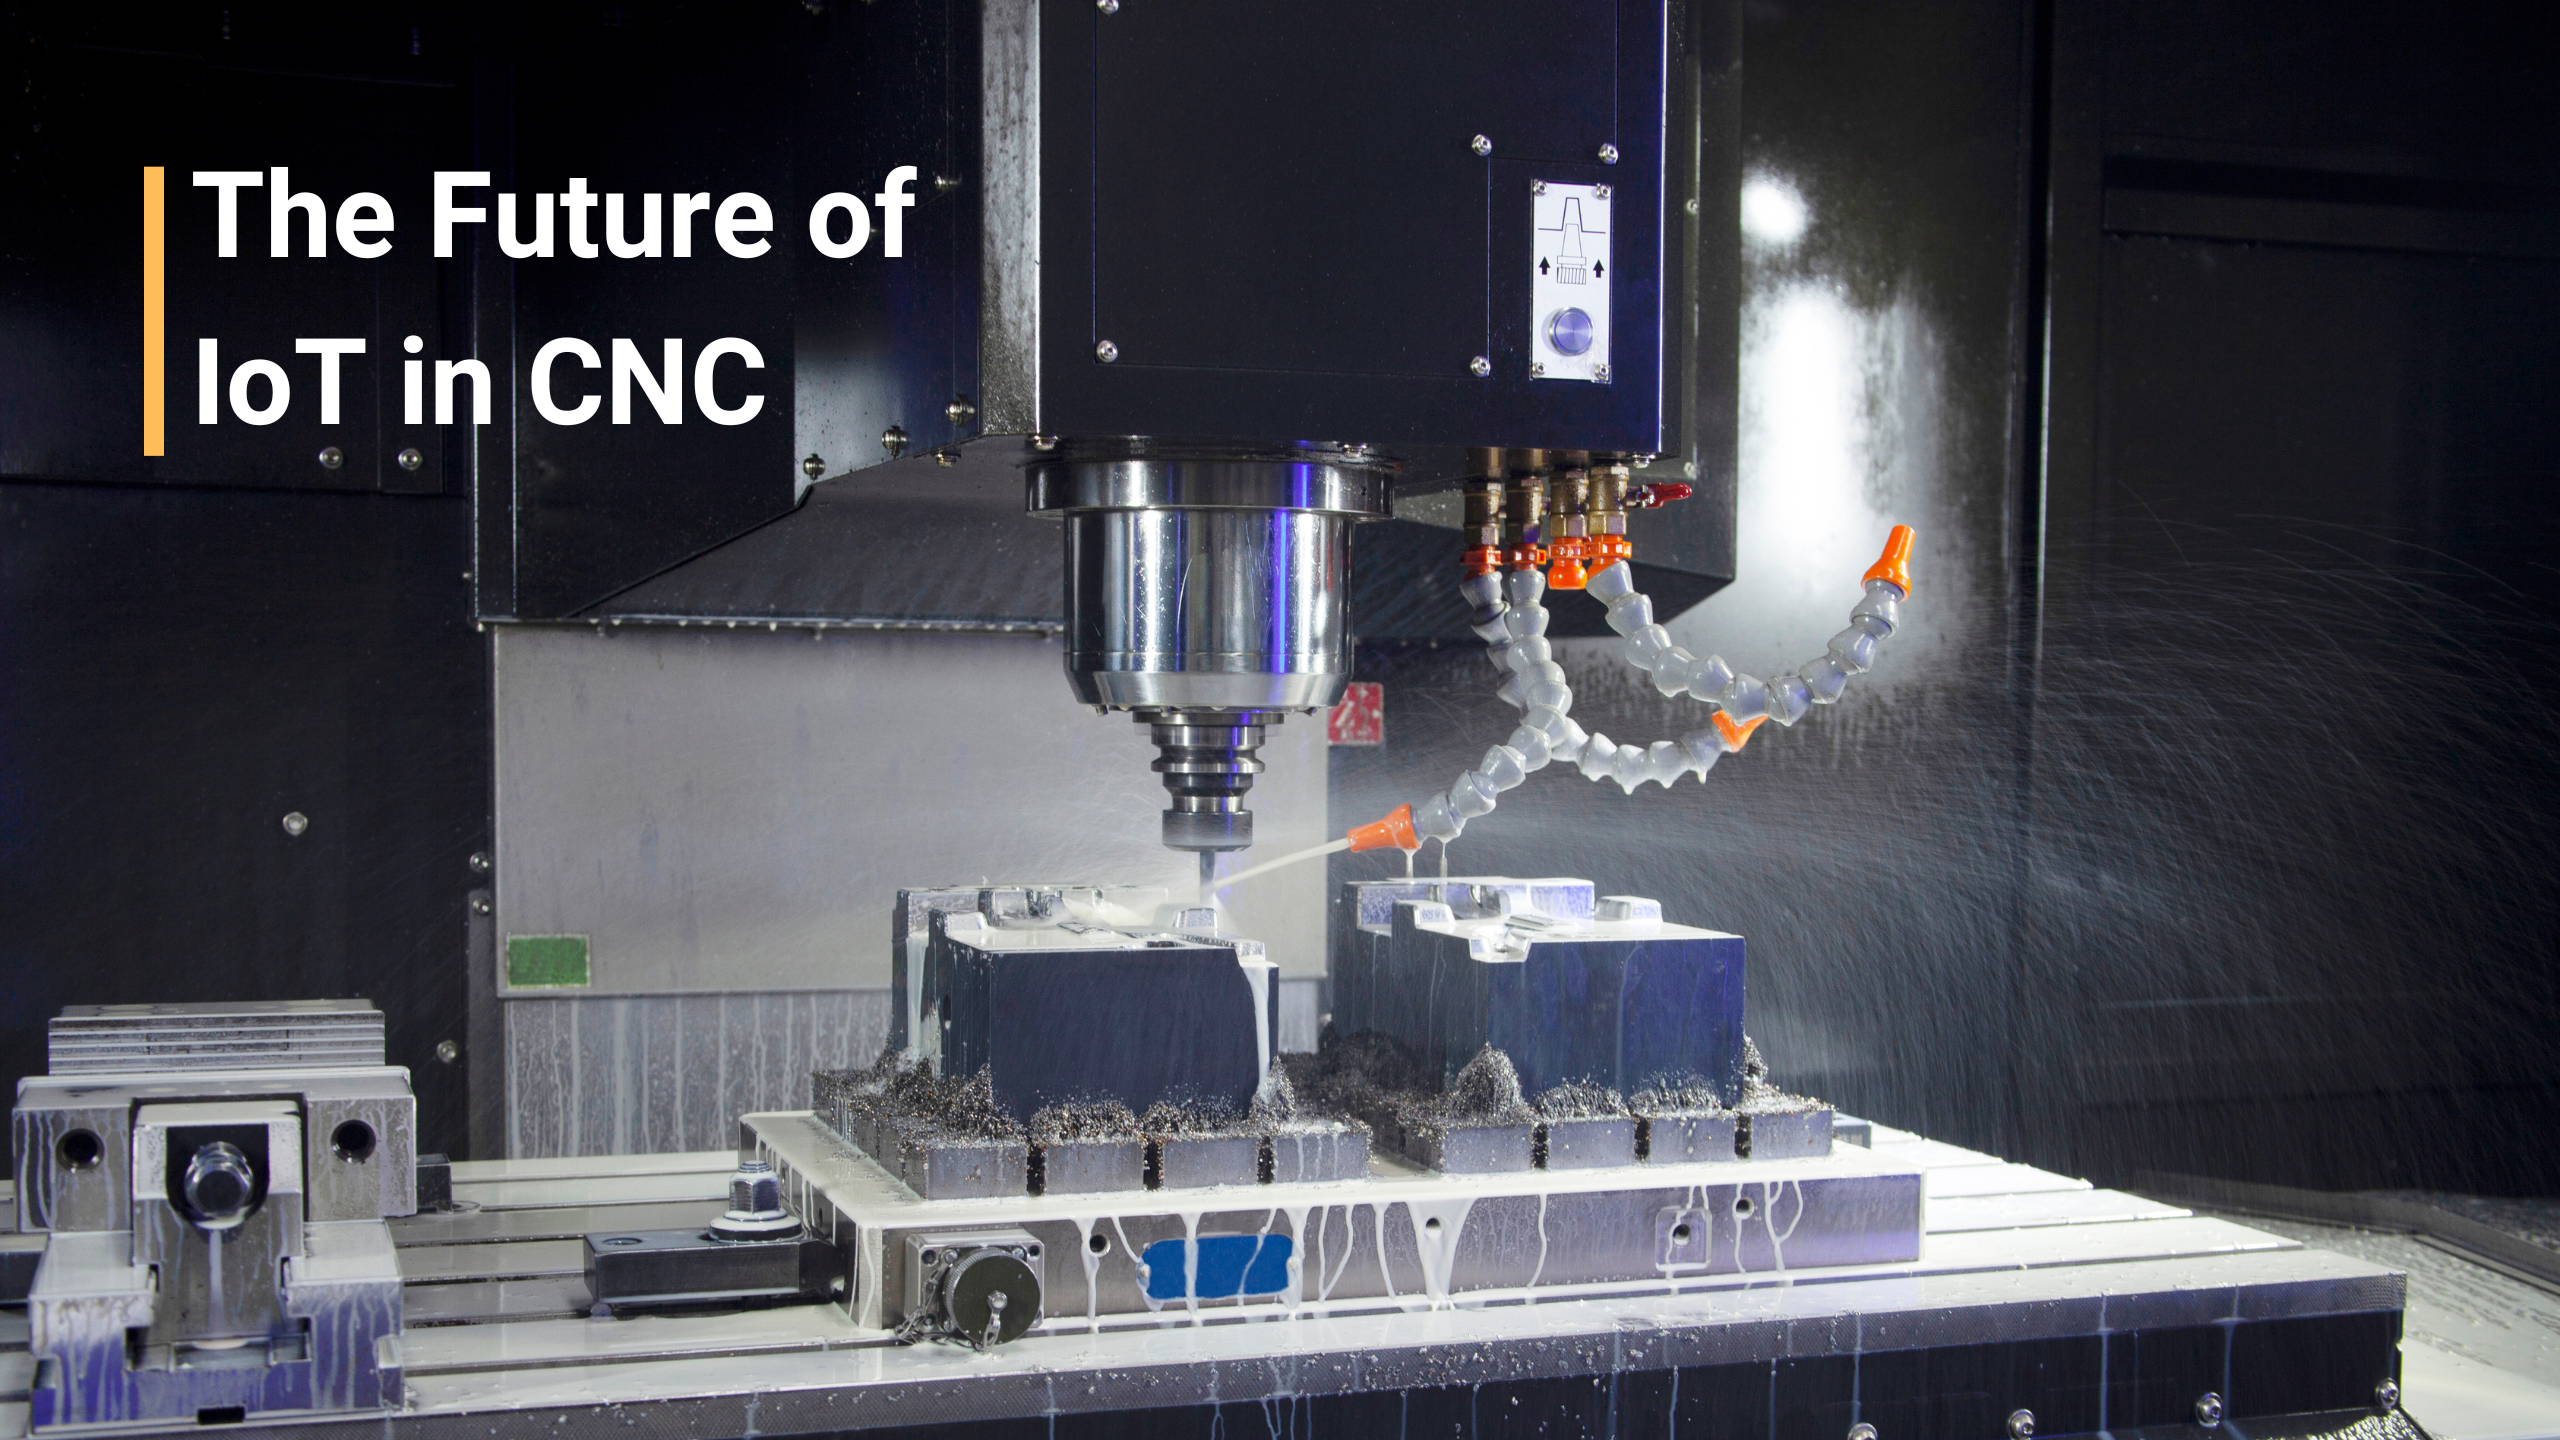 The Future of IoT in CNC​